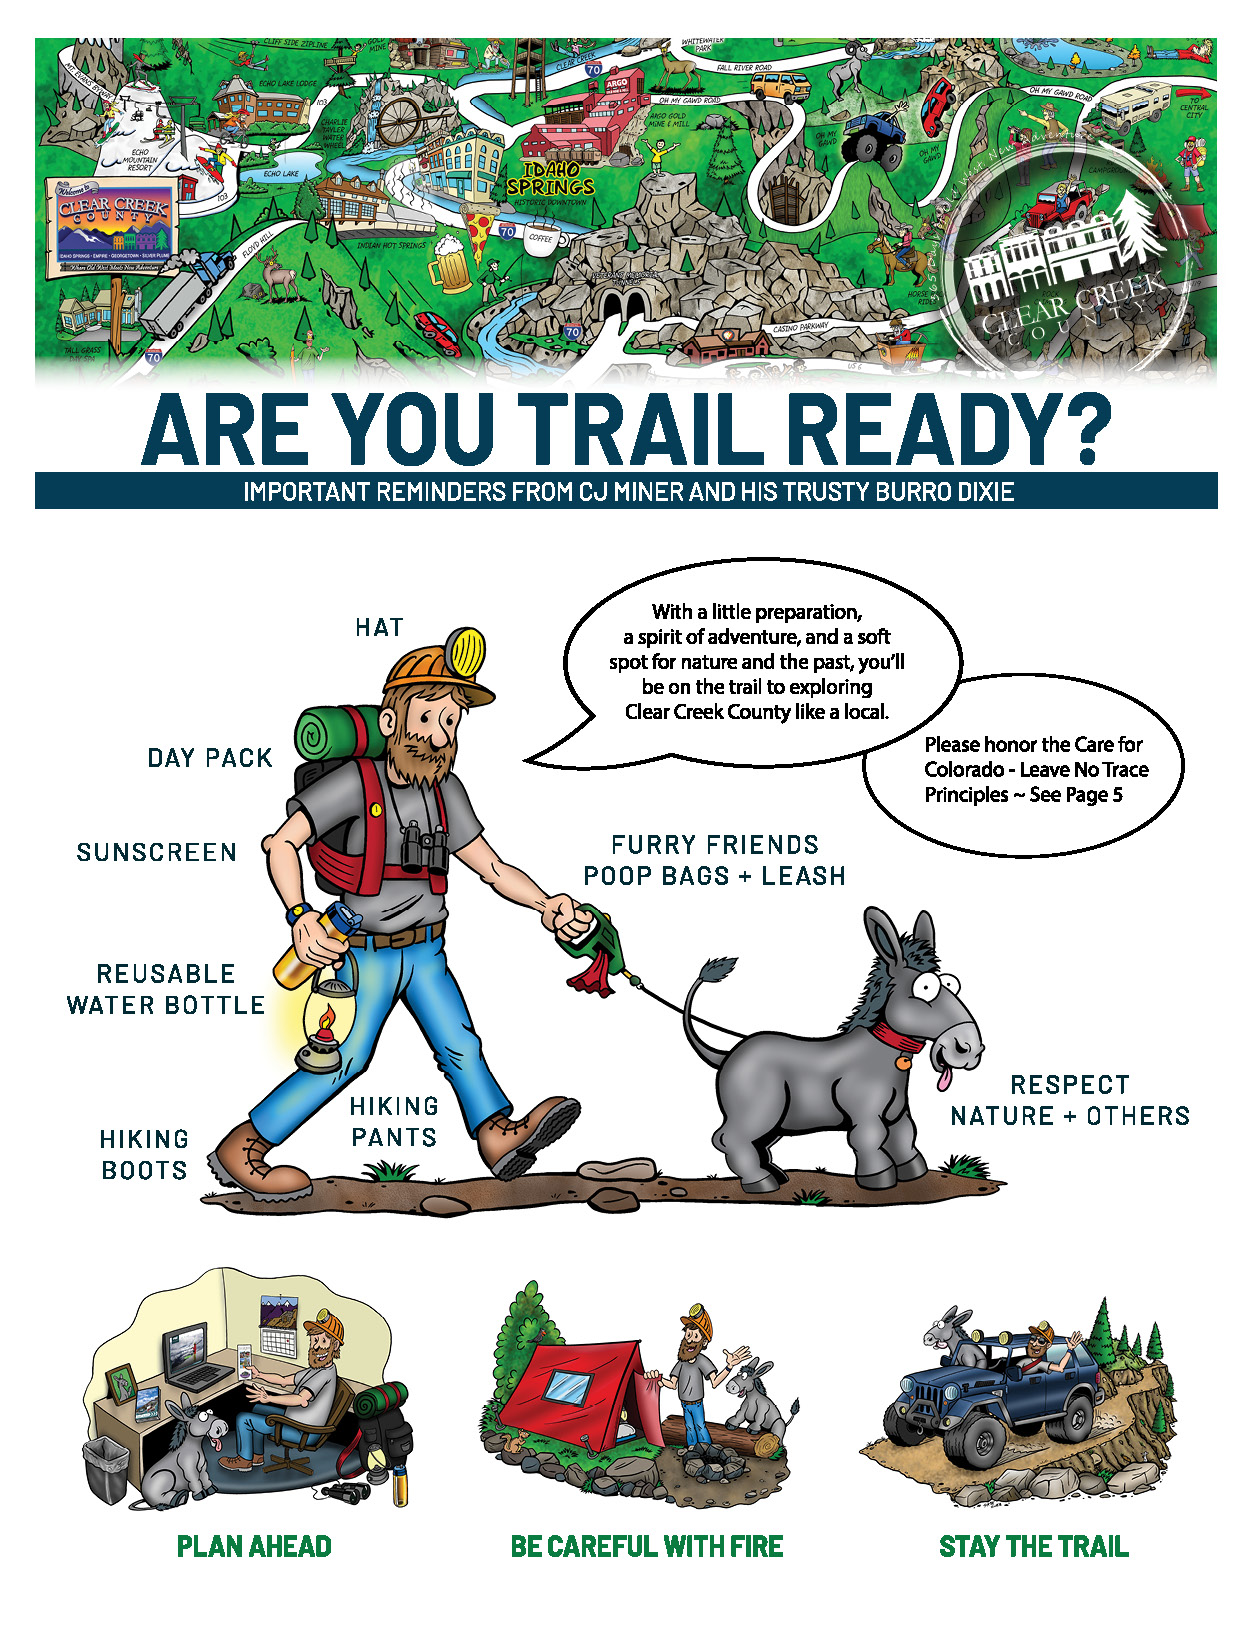 Clear Creek Visitor Guide Are you Trail Ready?